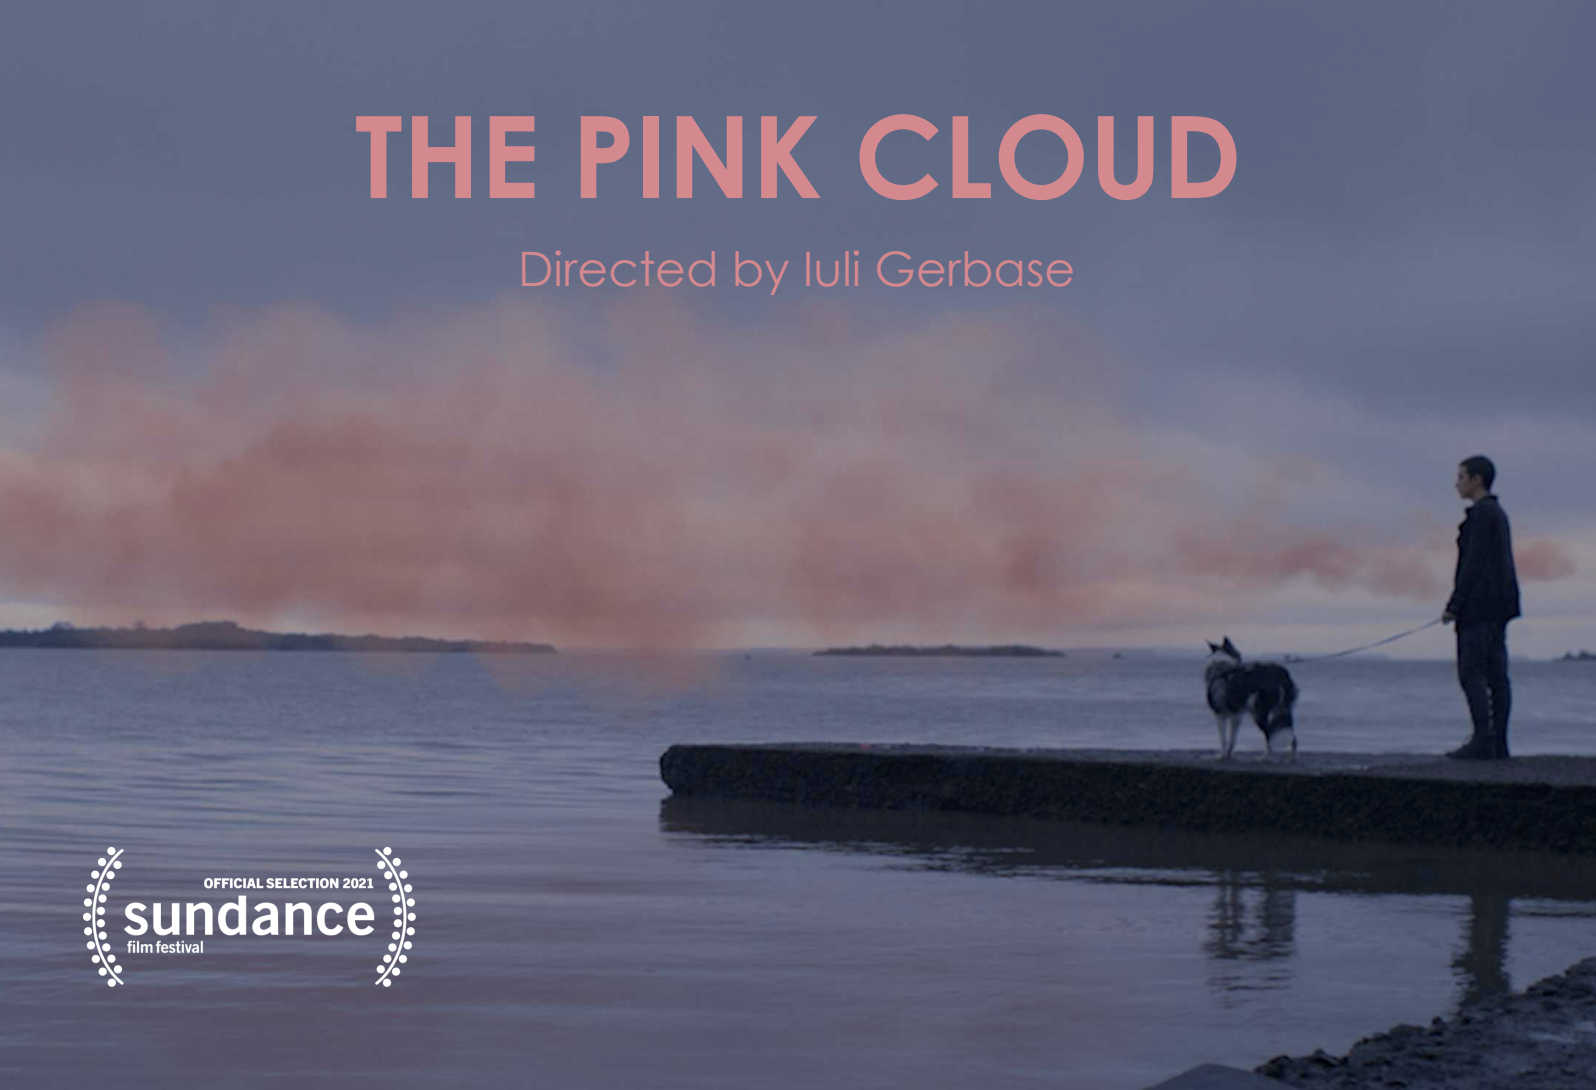 Iuli Gerbase Talks About Writing The Pink Cloud Before Covid19 [Exclusive Interview]